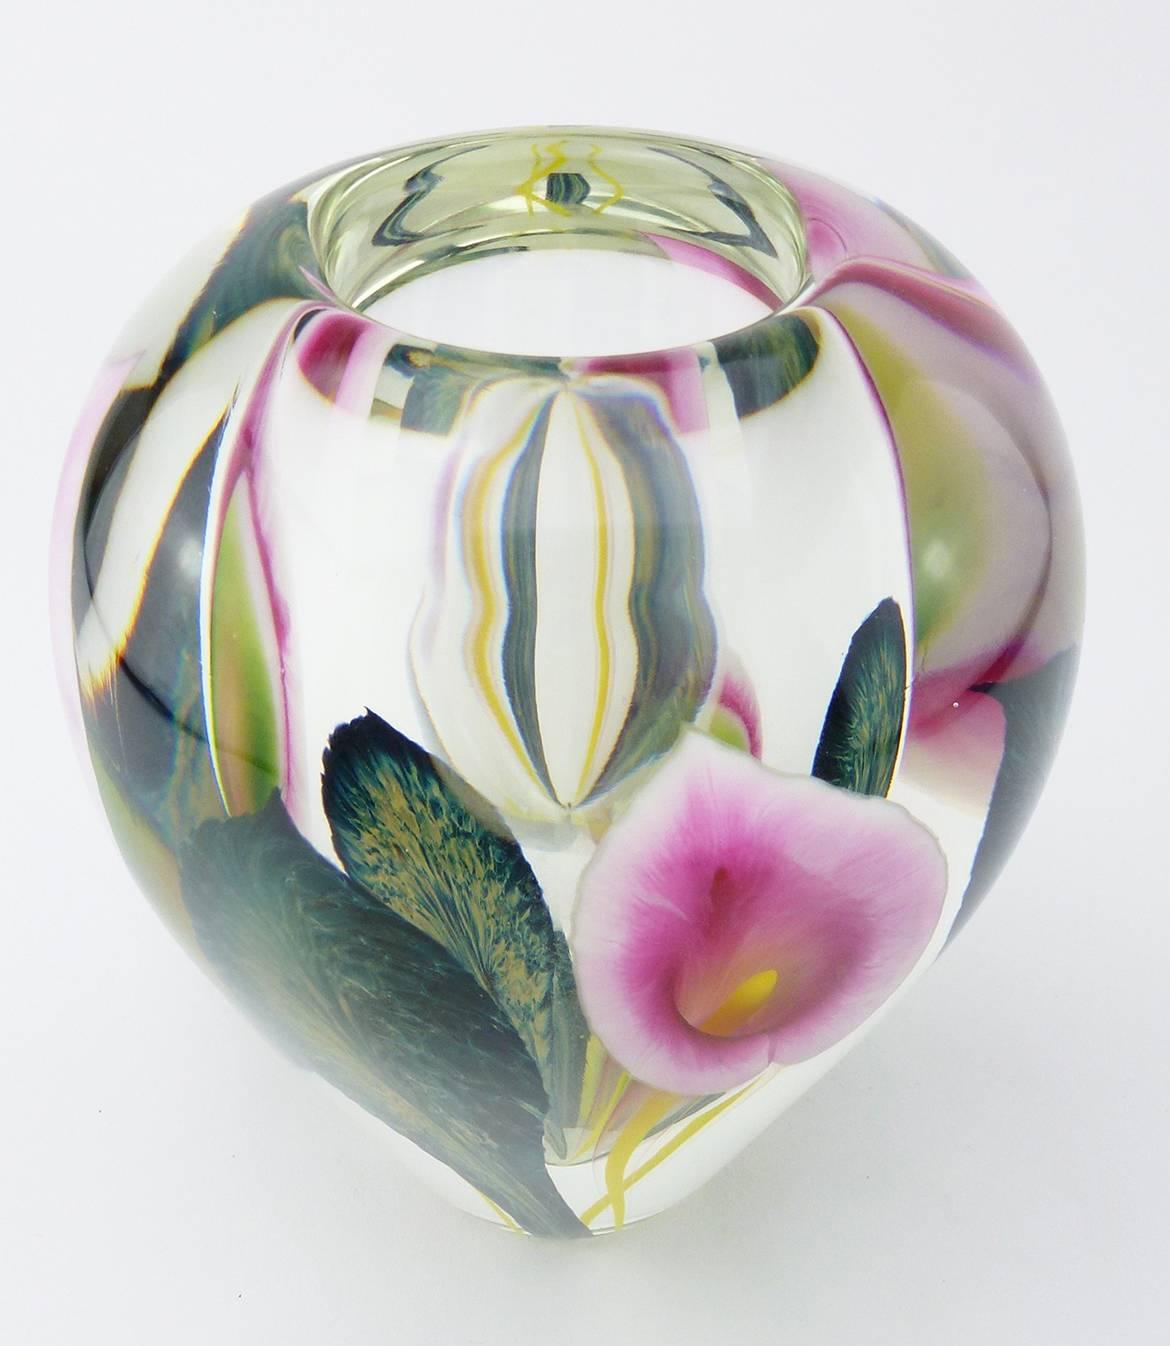 American studio Art Glass vase by Scott Bayless for Lotton studios, the tapering cased glass vase with pink calla lilies and green yellow leaves.
Signed to side near base, Scott Bayless and Lotton studios.
Measures: 7 1/4